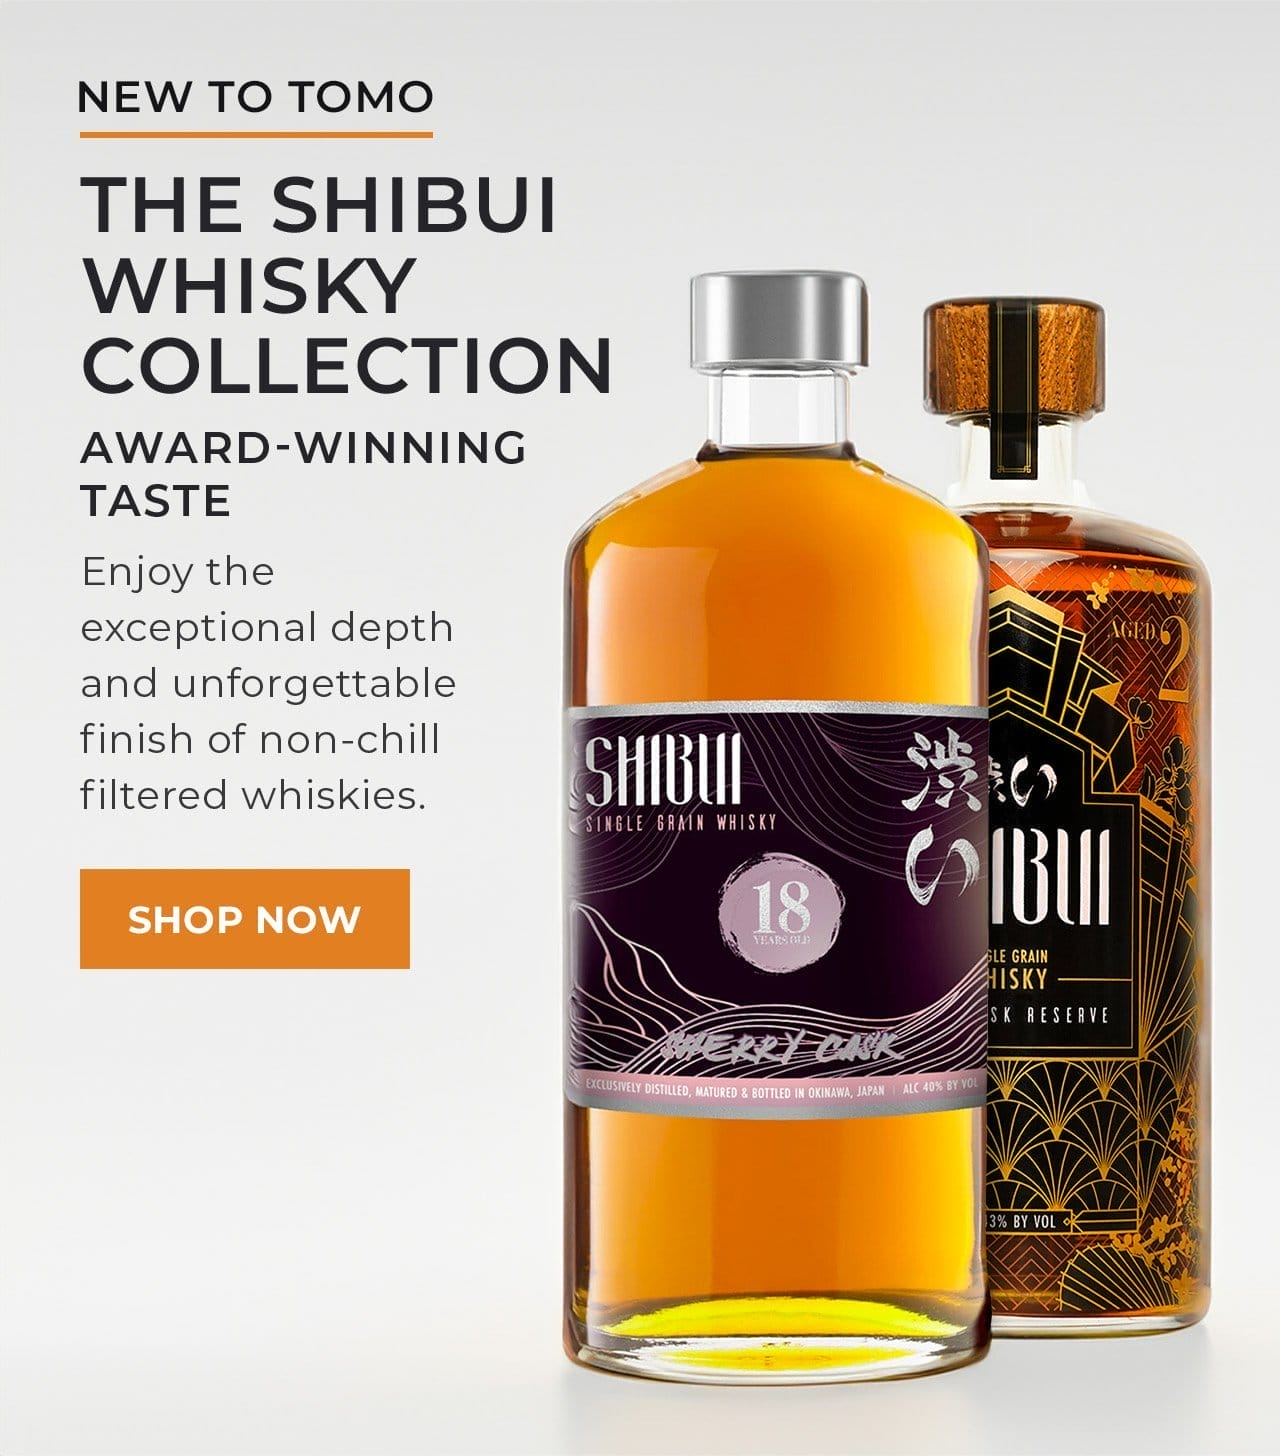 The Shibui Whisky Collection | SHOP NOW